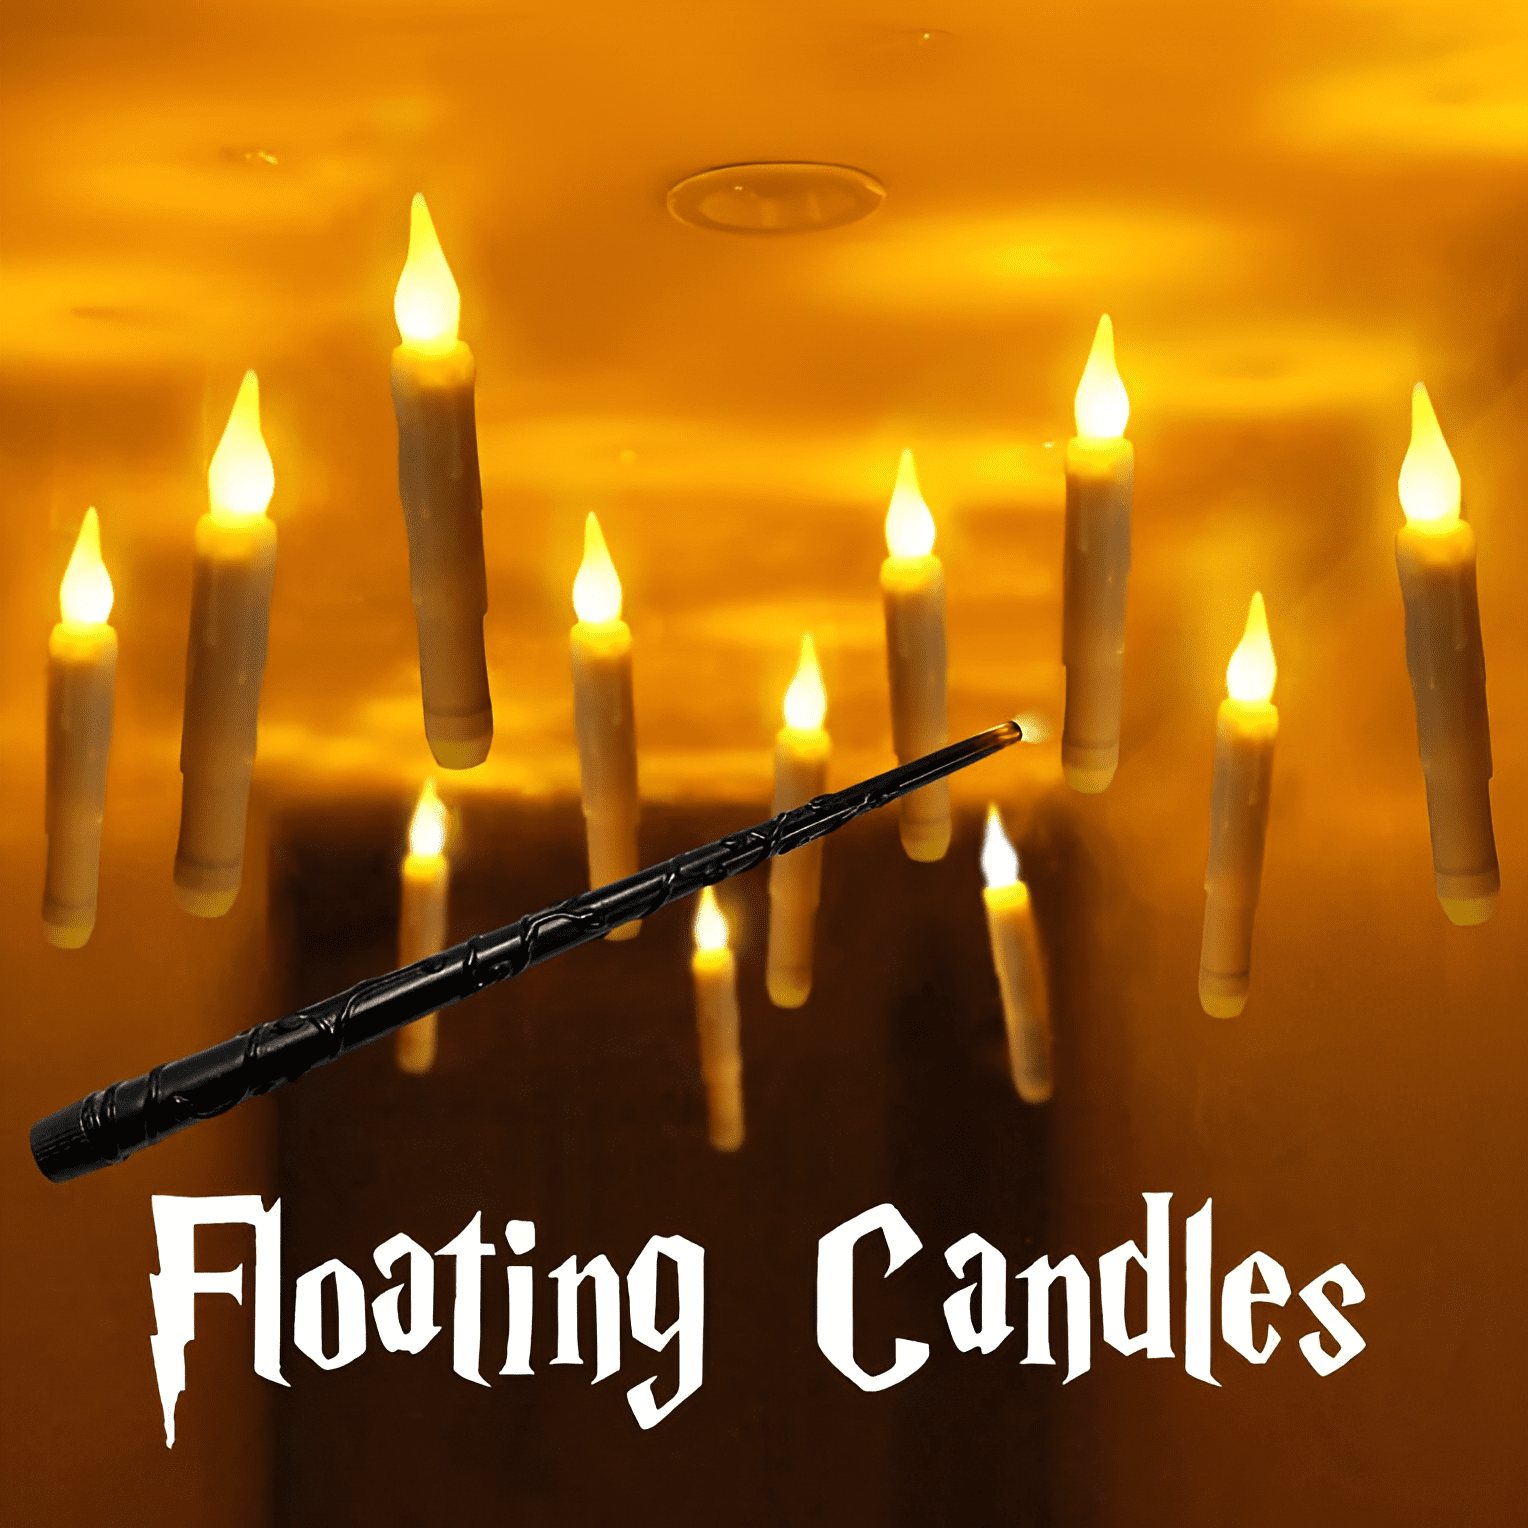  Aulaygo 12pcs Harry Potter Floating Candles with Magic Wand  Remote with 10 Vintage Beige Envelopes with Wax Seal Stickers Flameless  Taper Candles for Halloween Home Party Christmas Decor : Tools 